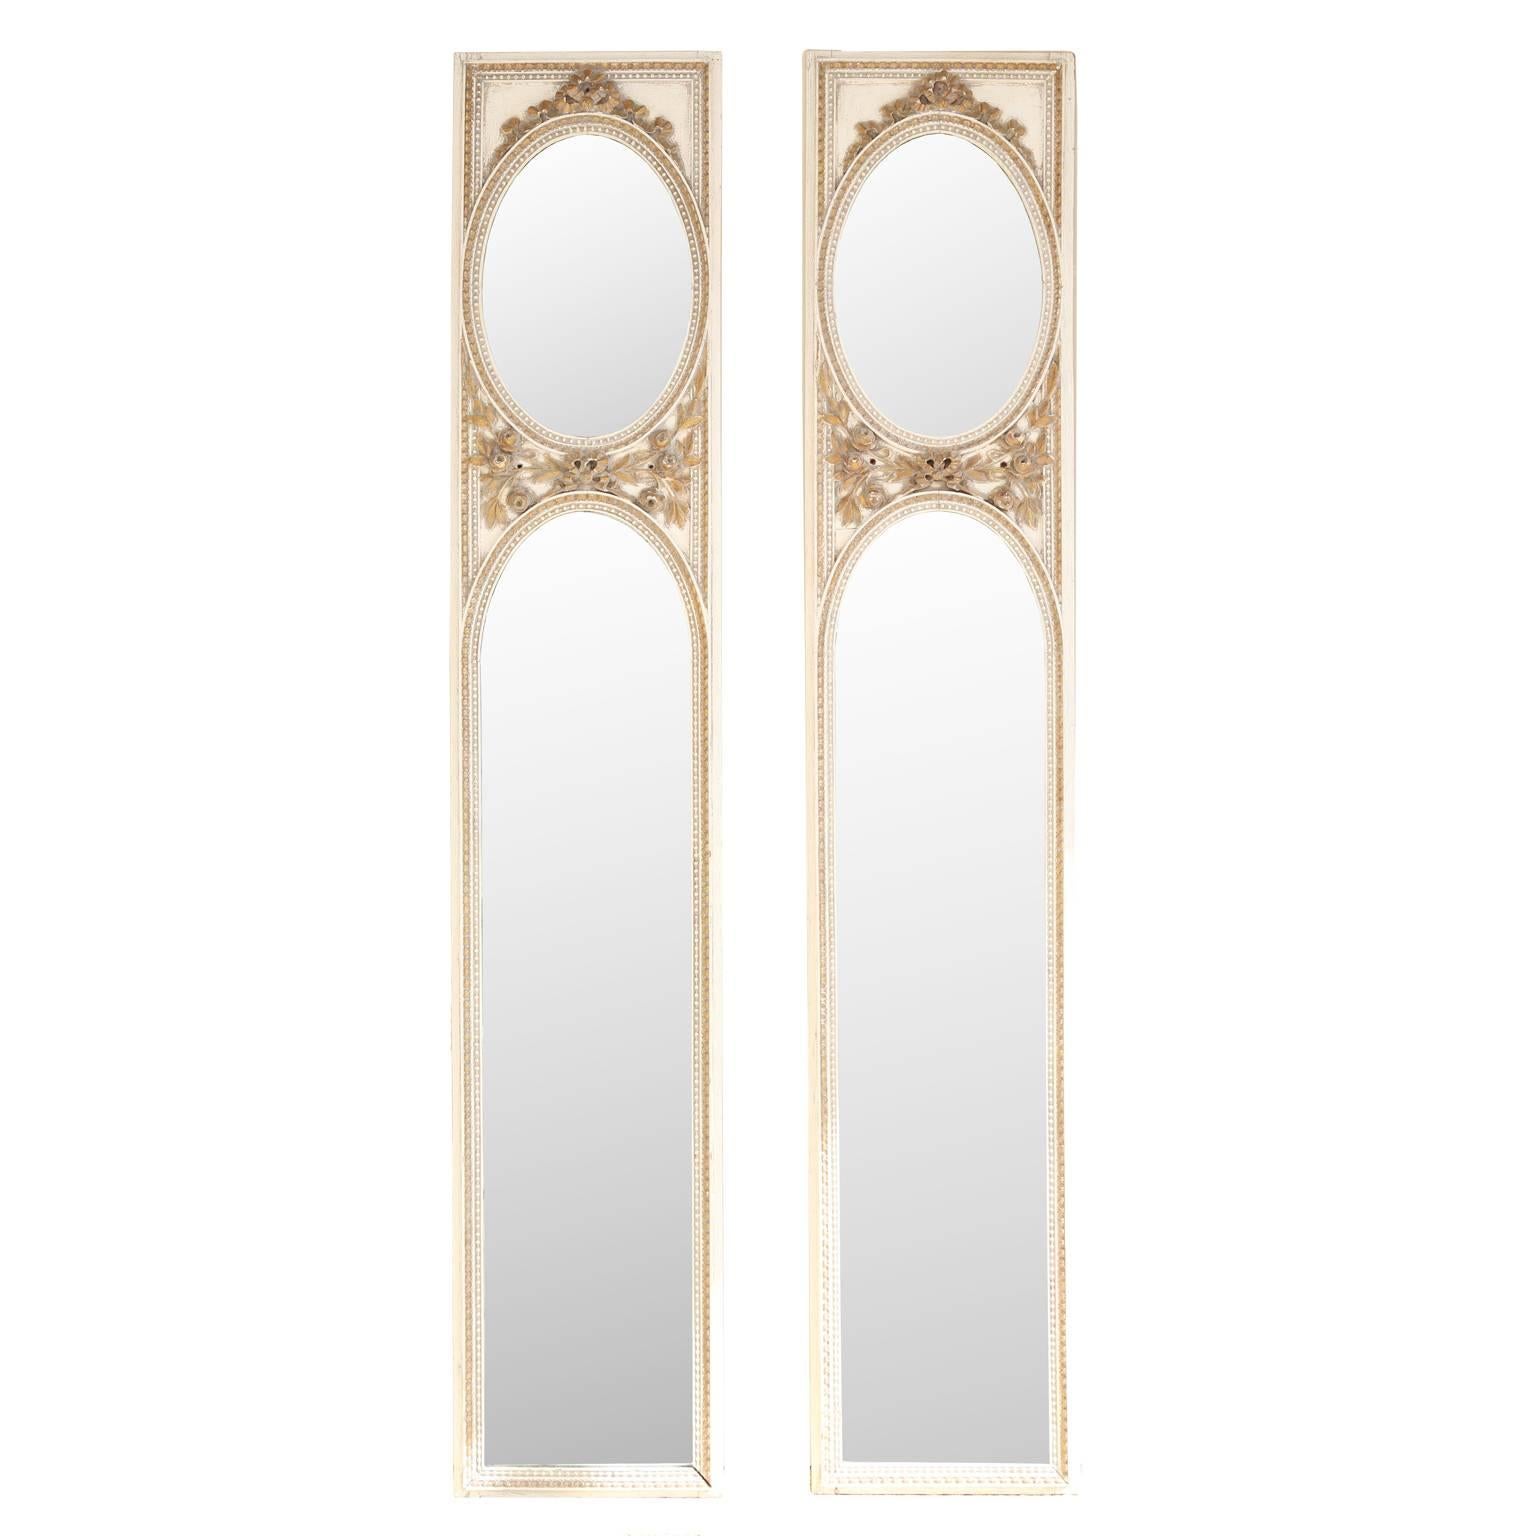 Pair of Long and Narrow 19th Century, Mirrored French Boiserie Panels